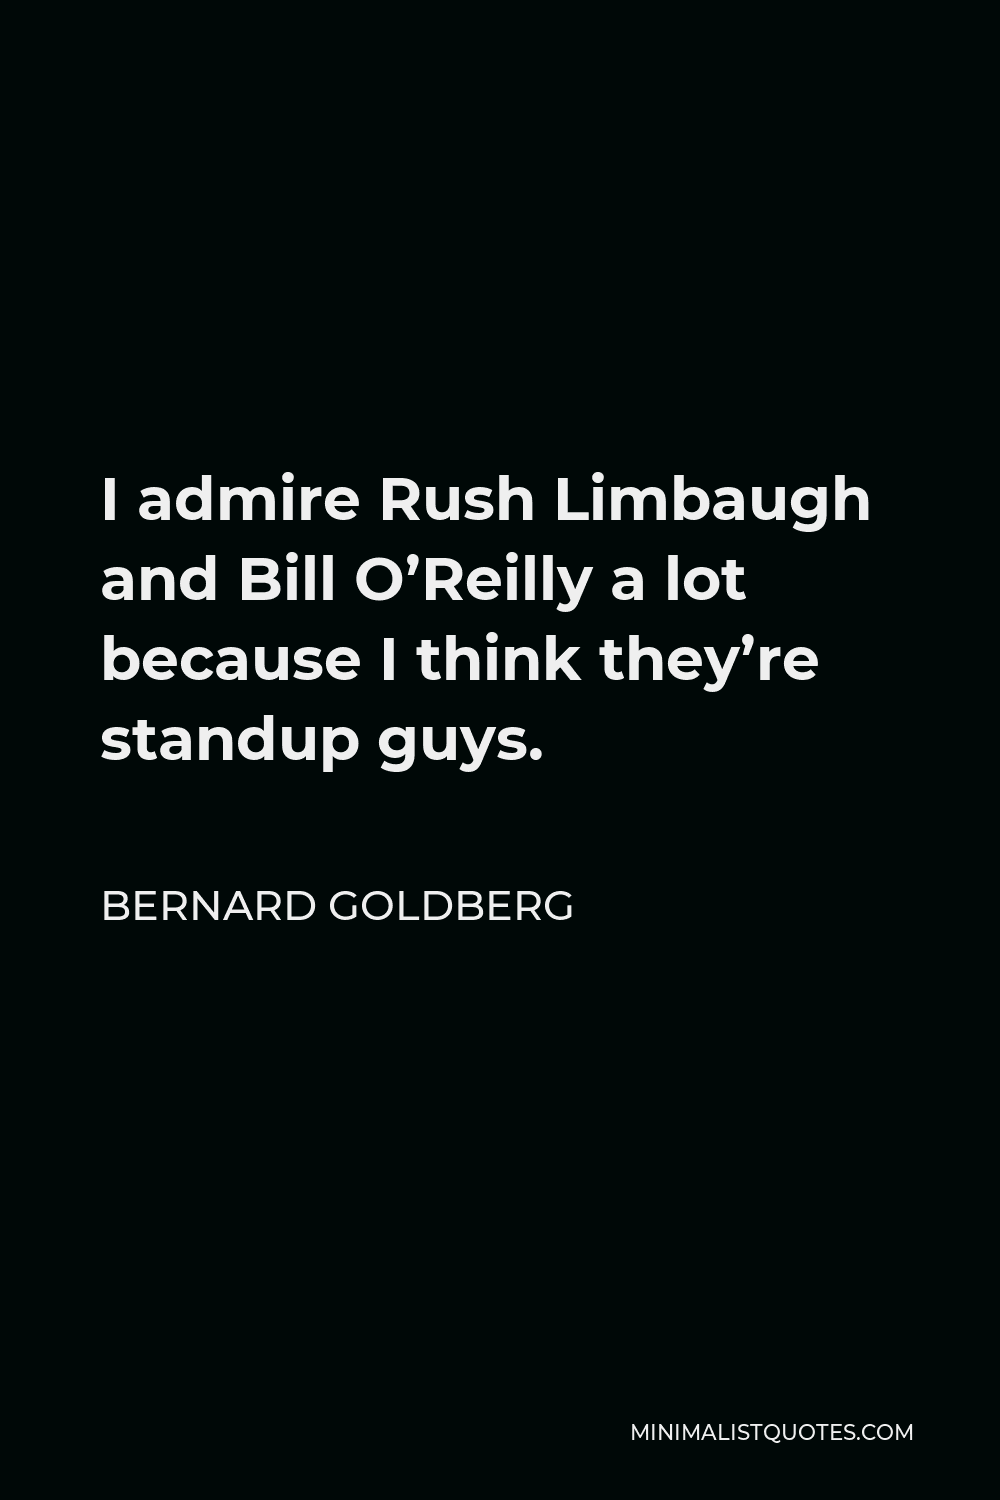 Bernard Goldberg Quote - I admire Rush Limbaugh and Bill O’Reilly a lot because I think they’re standup guys.